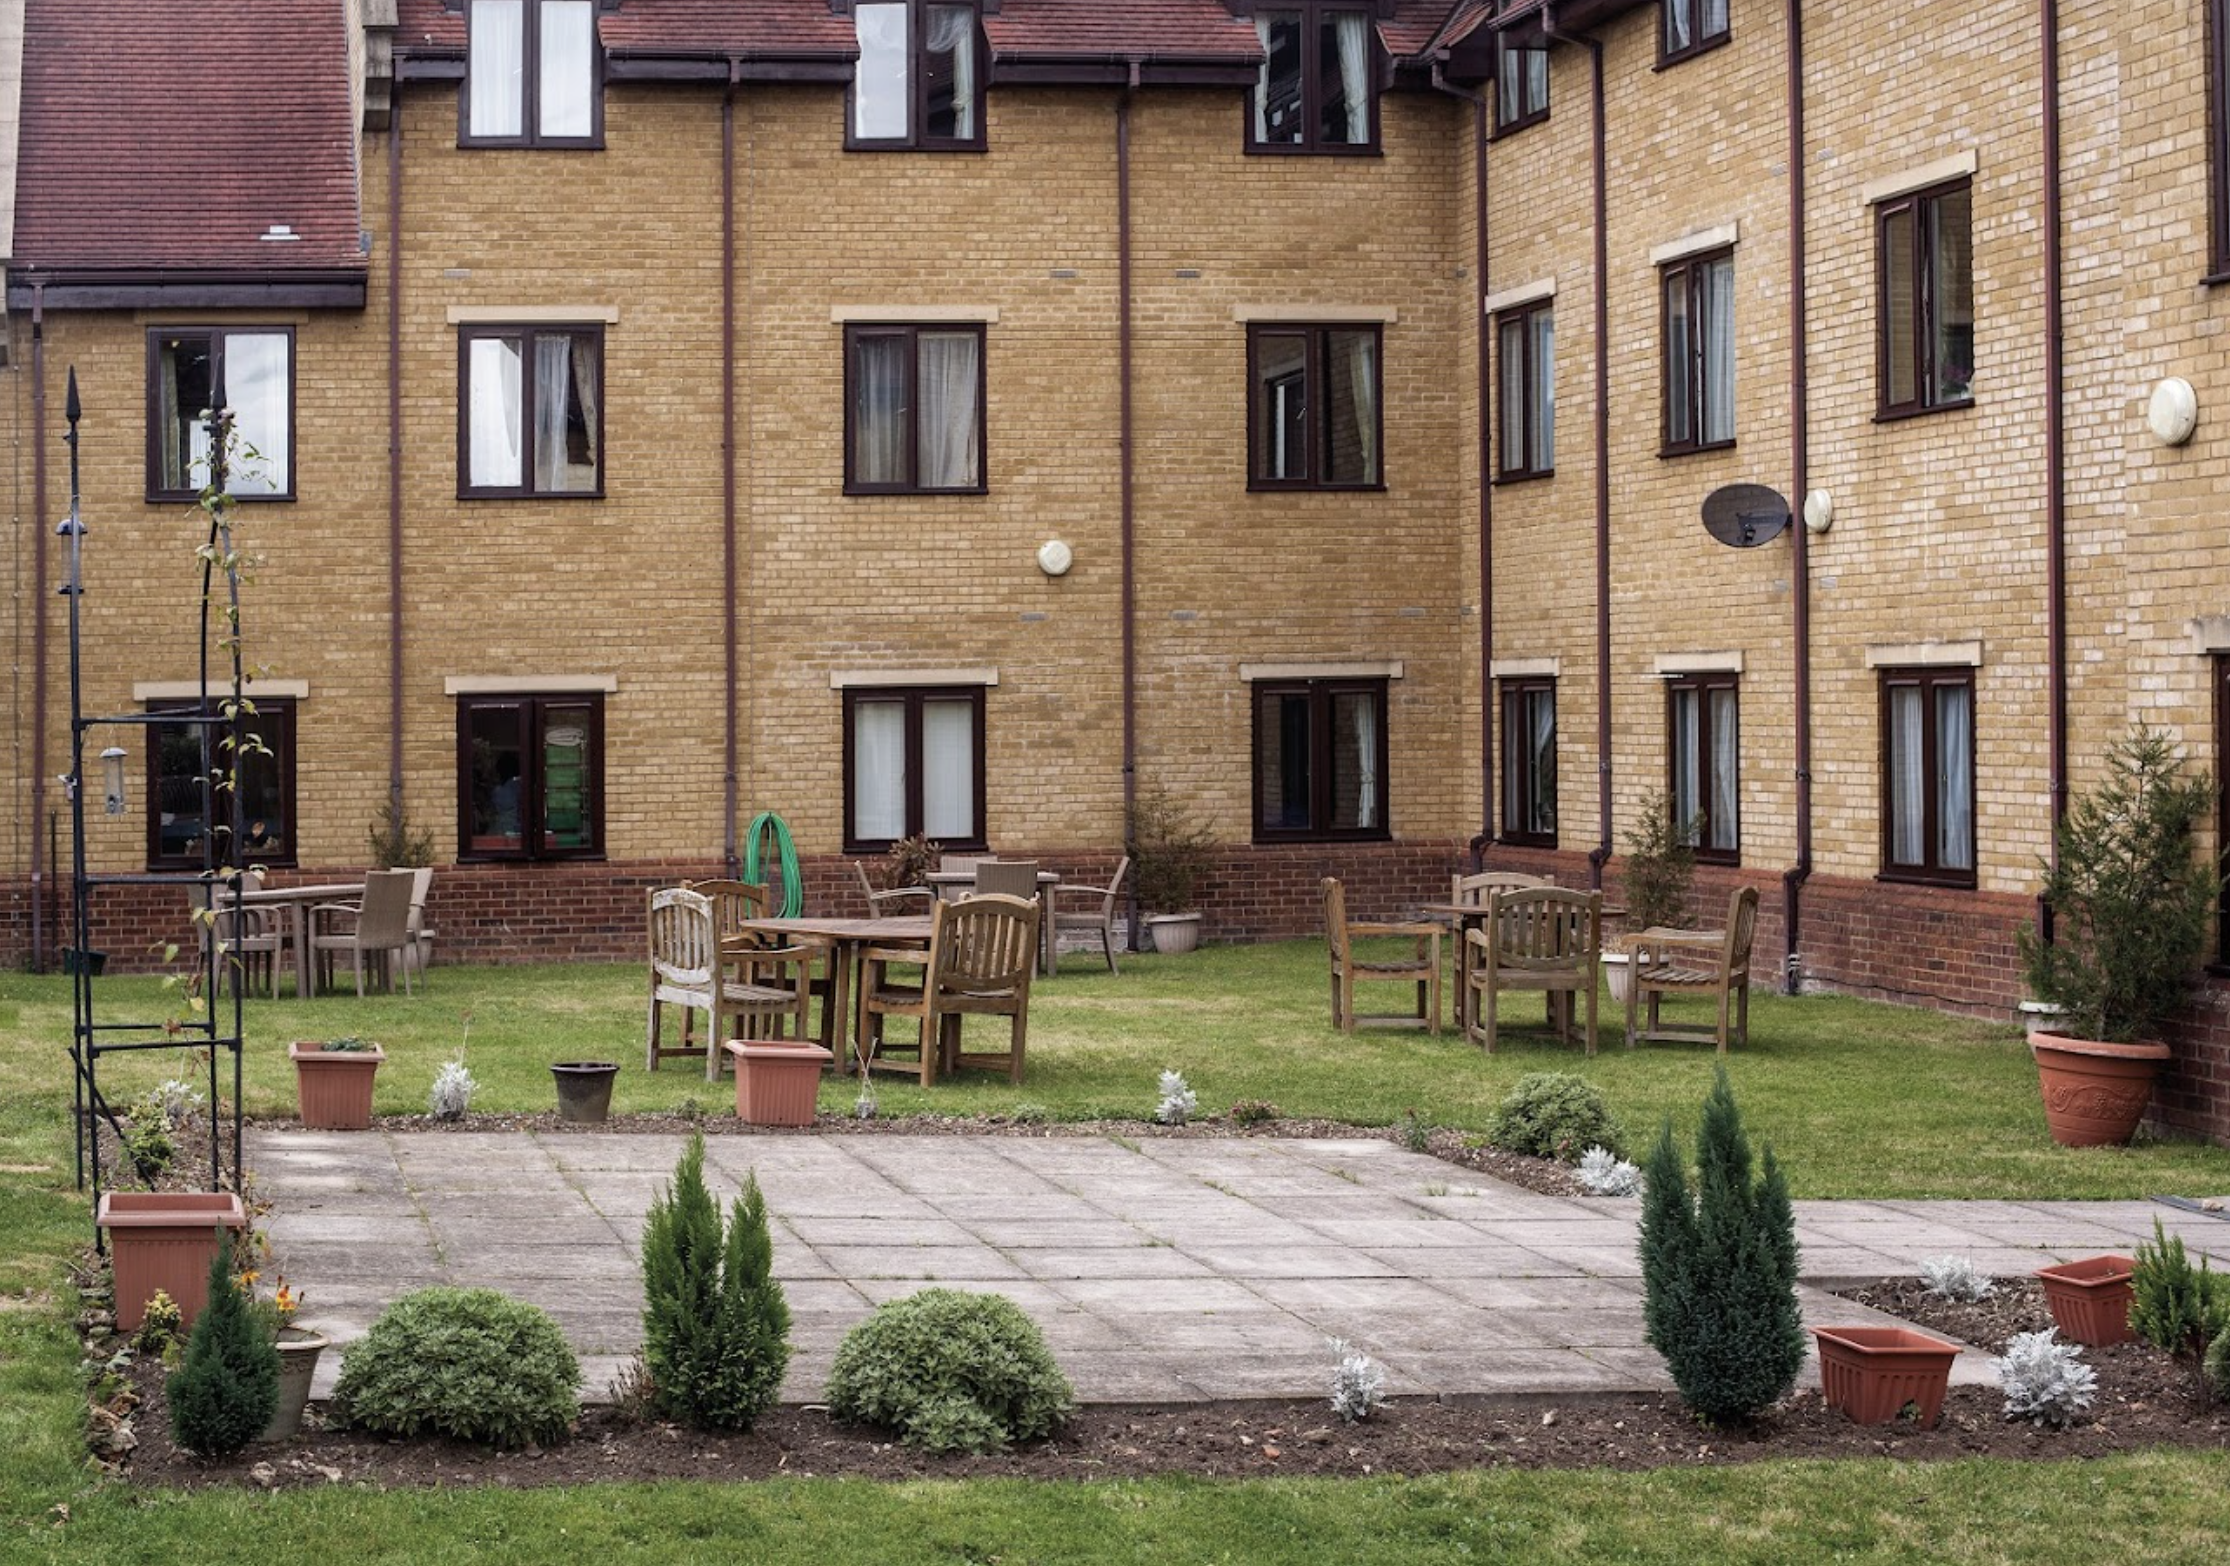 Exterior of Middlesex Manor care home in Wembley, London